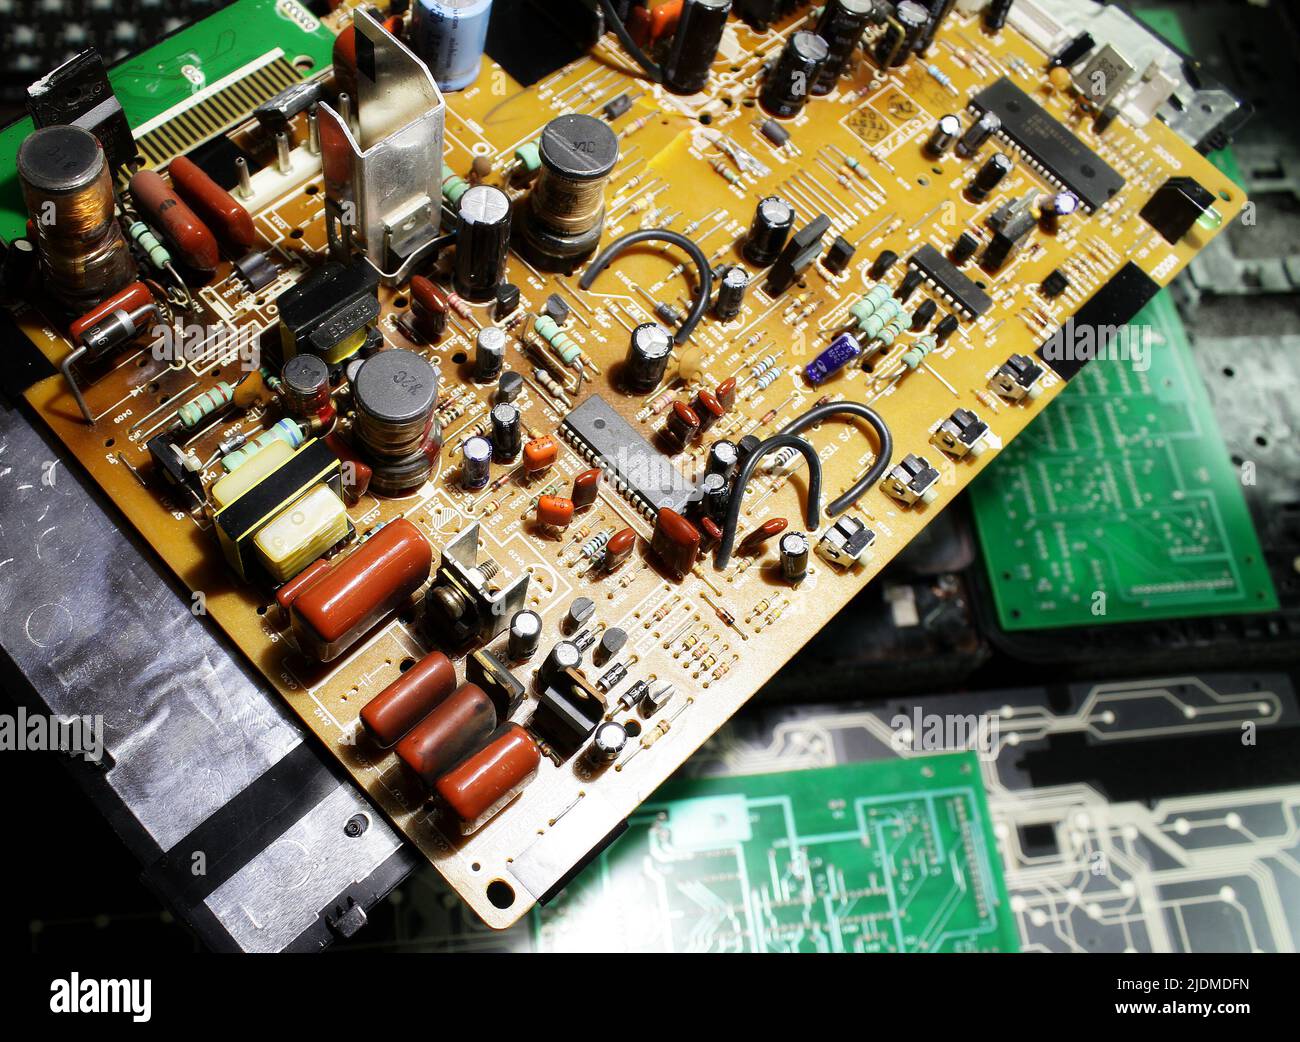 Repair Printed Electronic Board At Microchips And Semiconductors Crisis Stock Photo